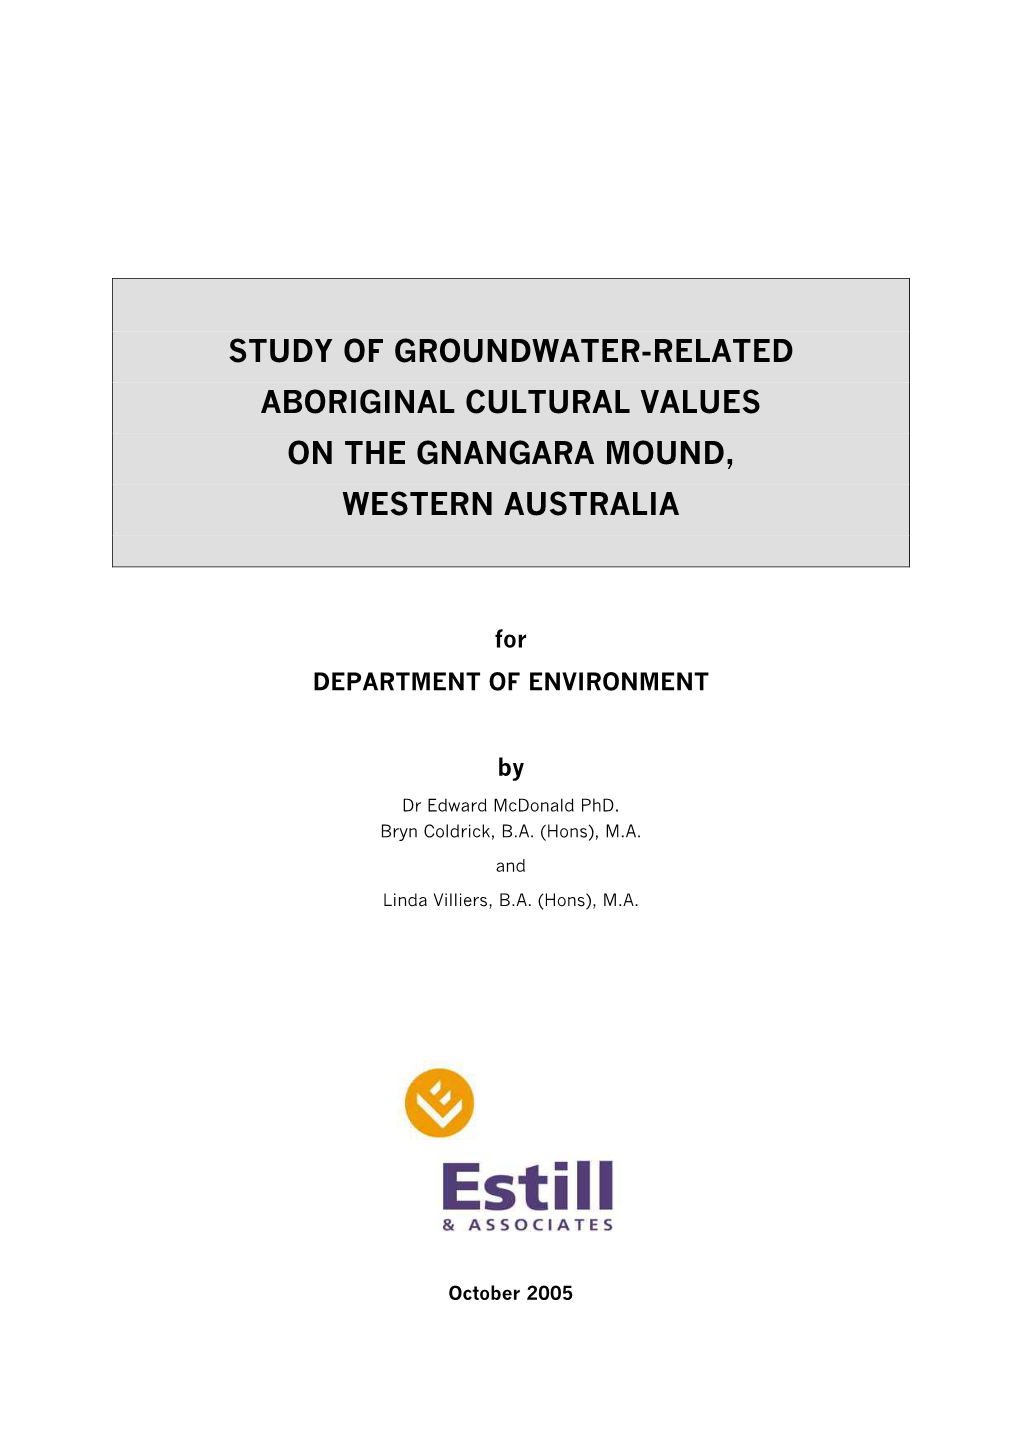 Study of Groundwater-Related Aboriginal Cultural Values on the Gnangara Mound, Western Australia